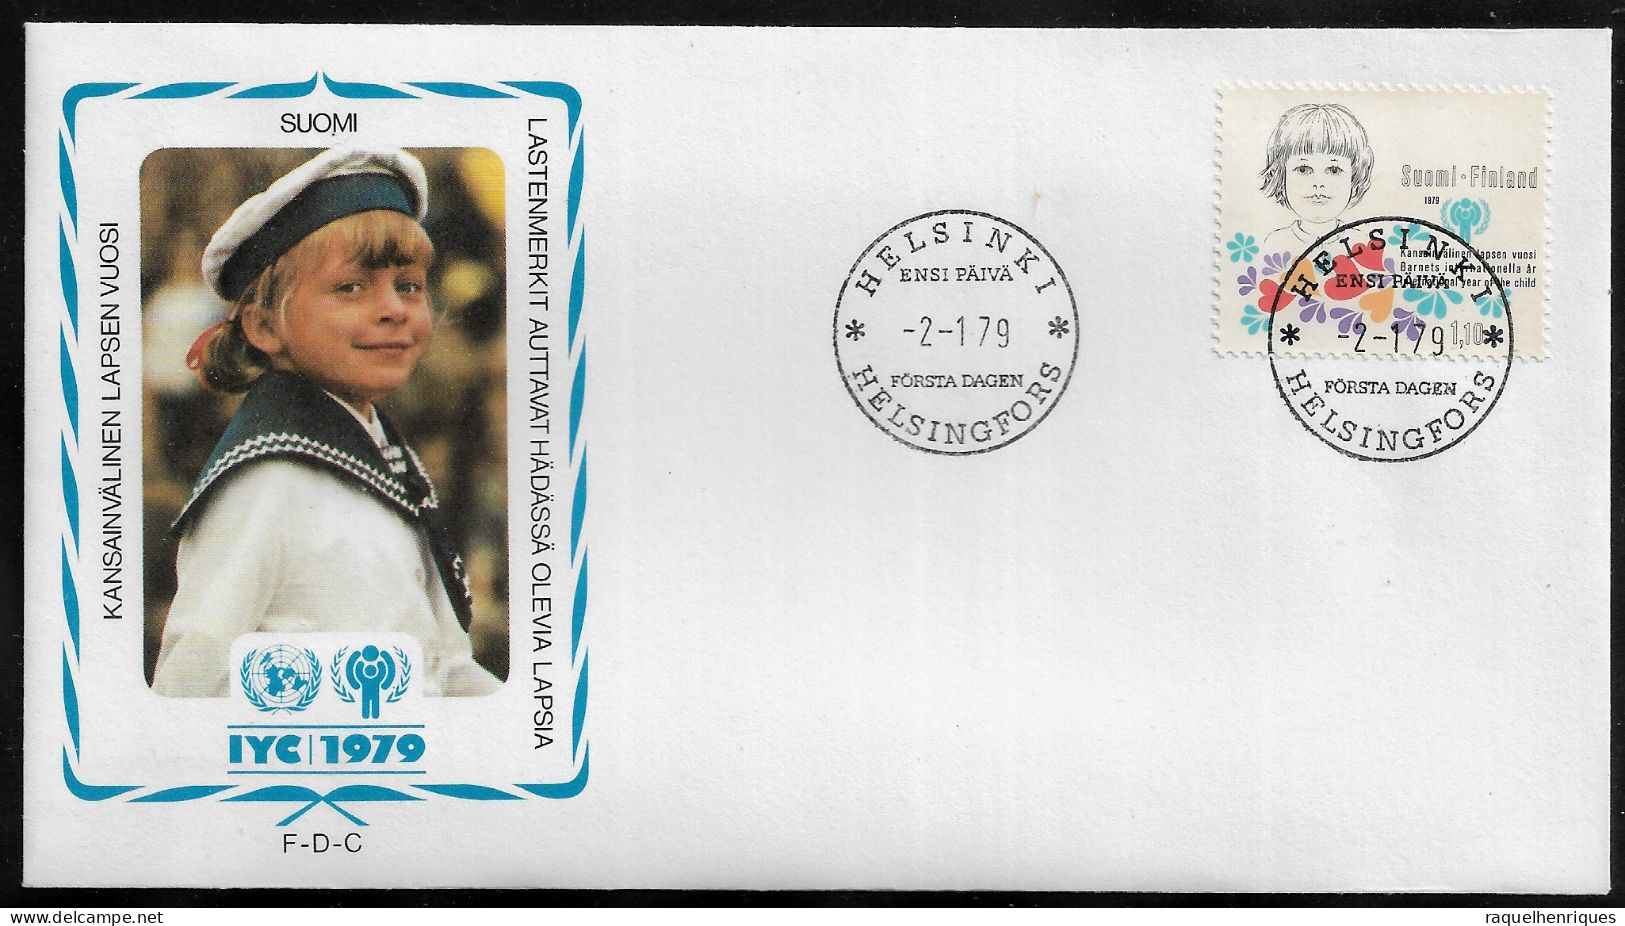 FINLAND FDC COVER - 1979 International Year Of The Child SET FDC (FDC79#08) - Covers & Documents